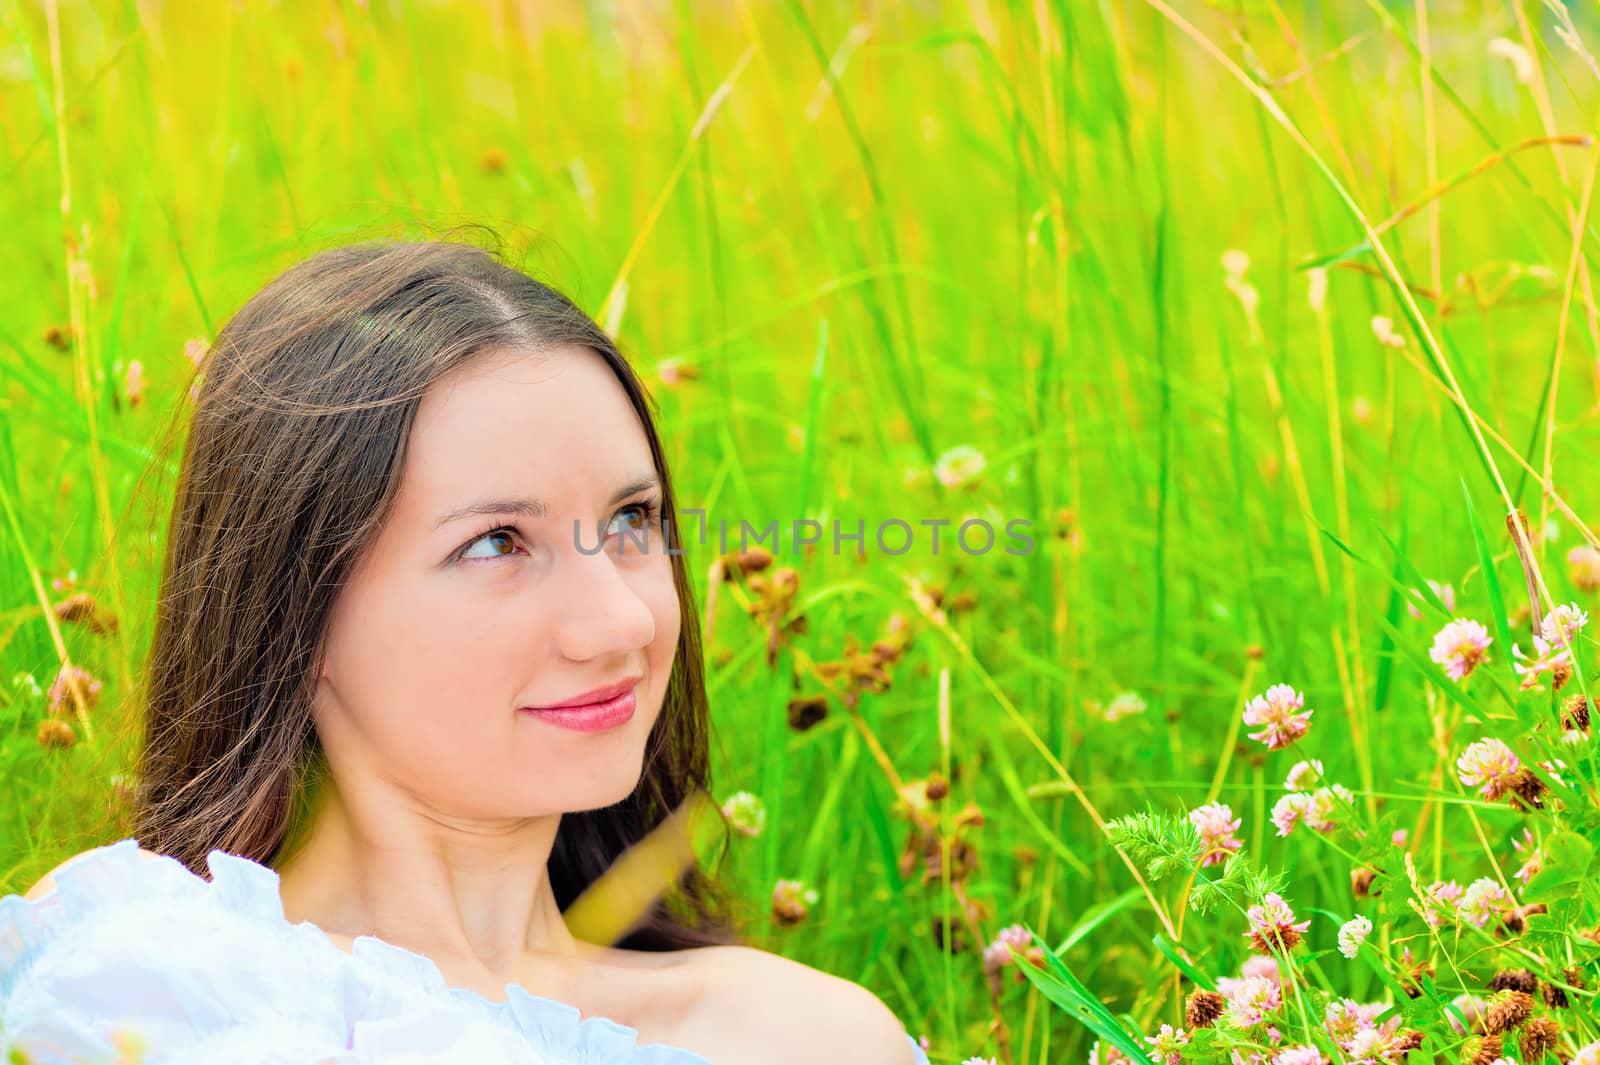 portrait of a girl in green grass and clover